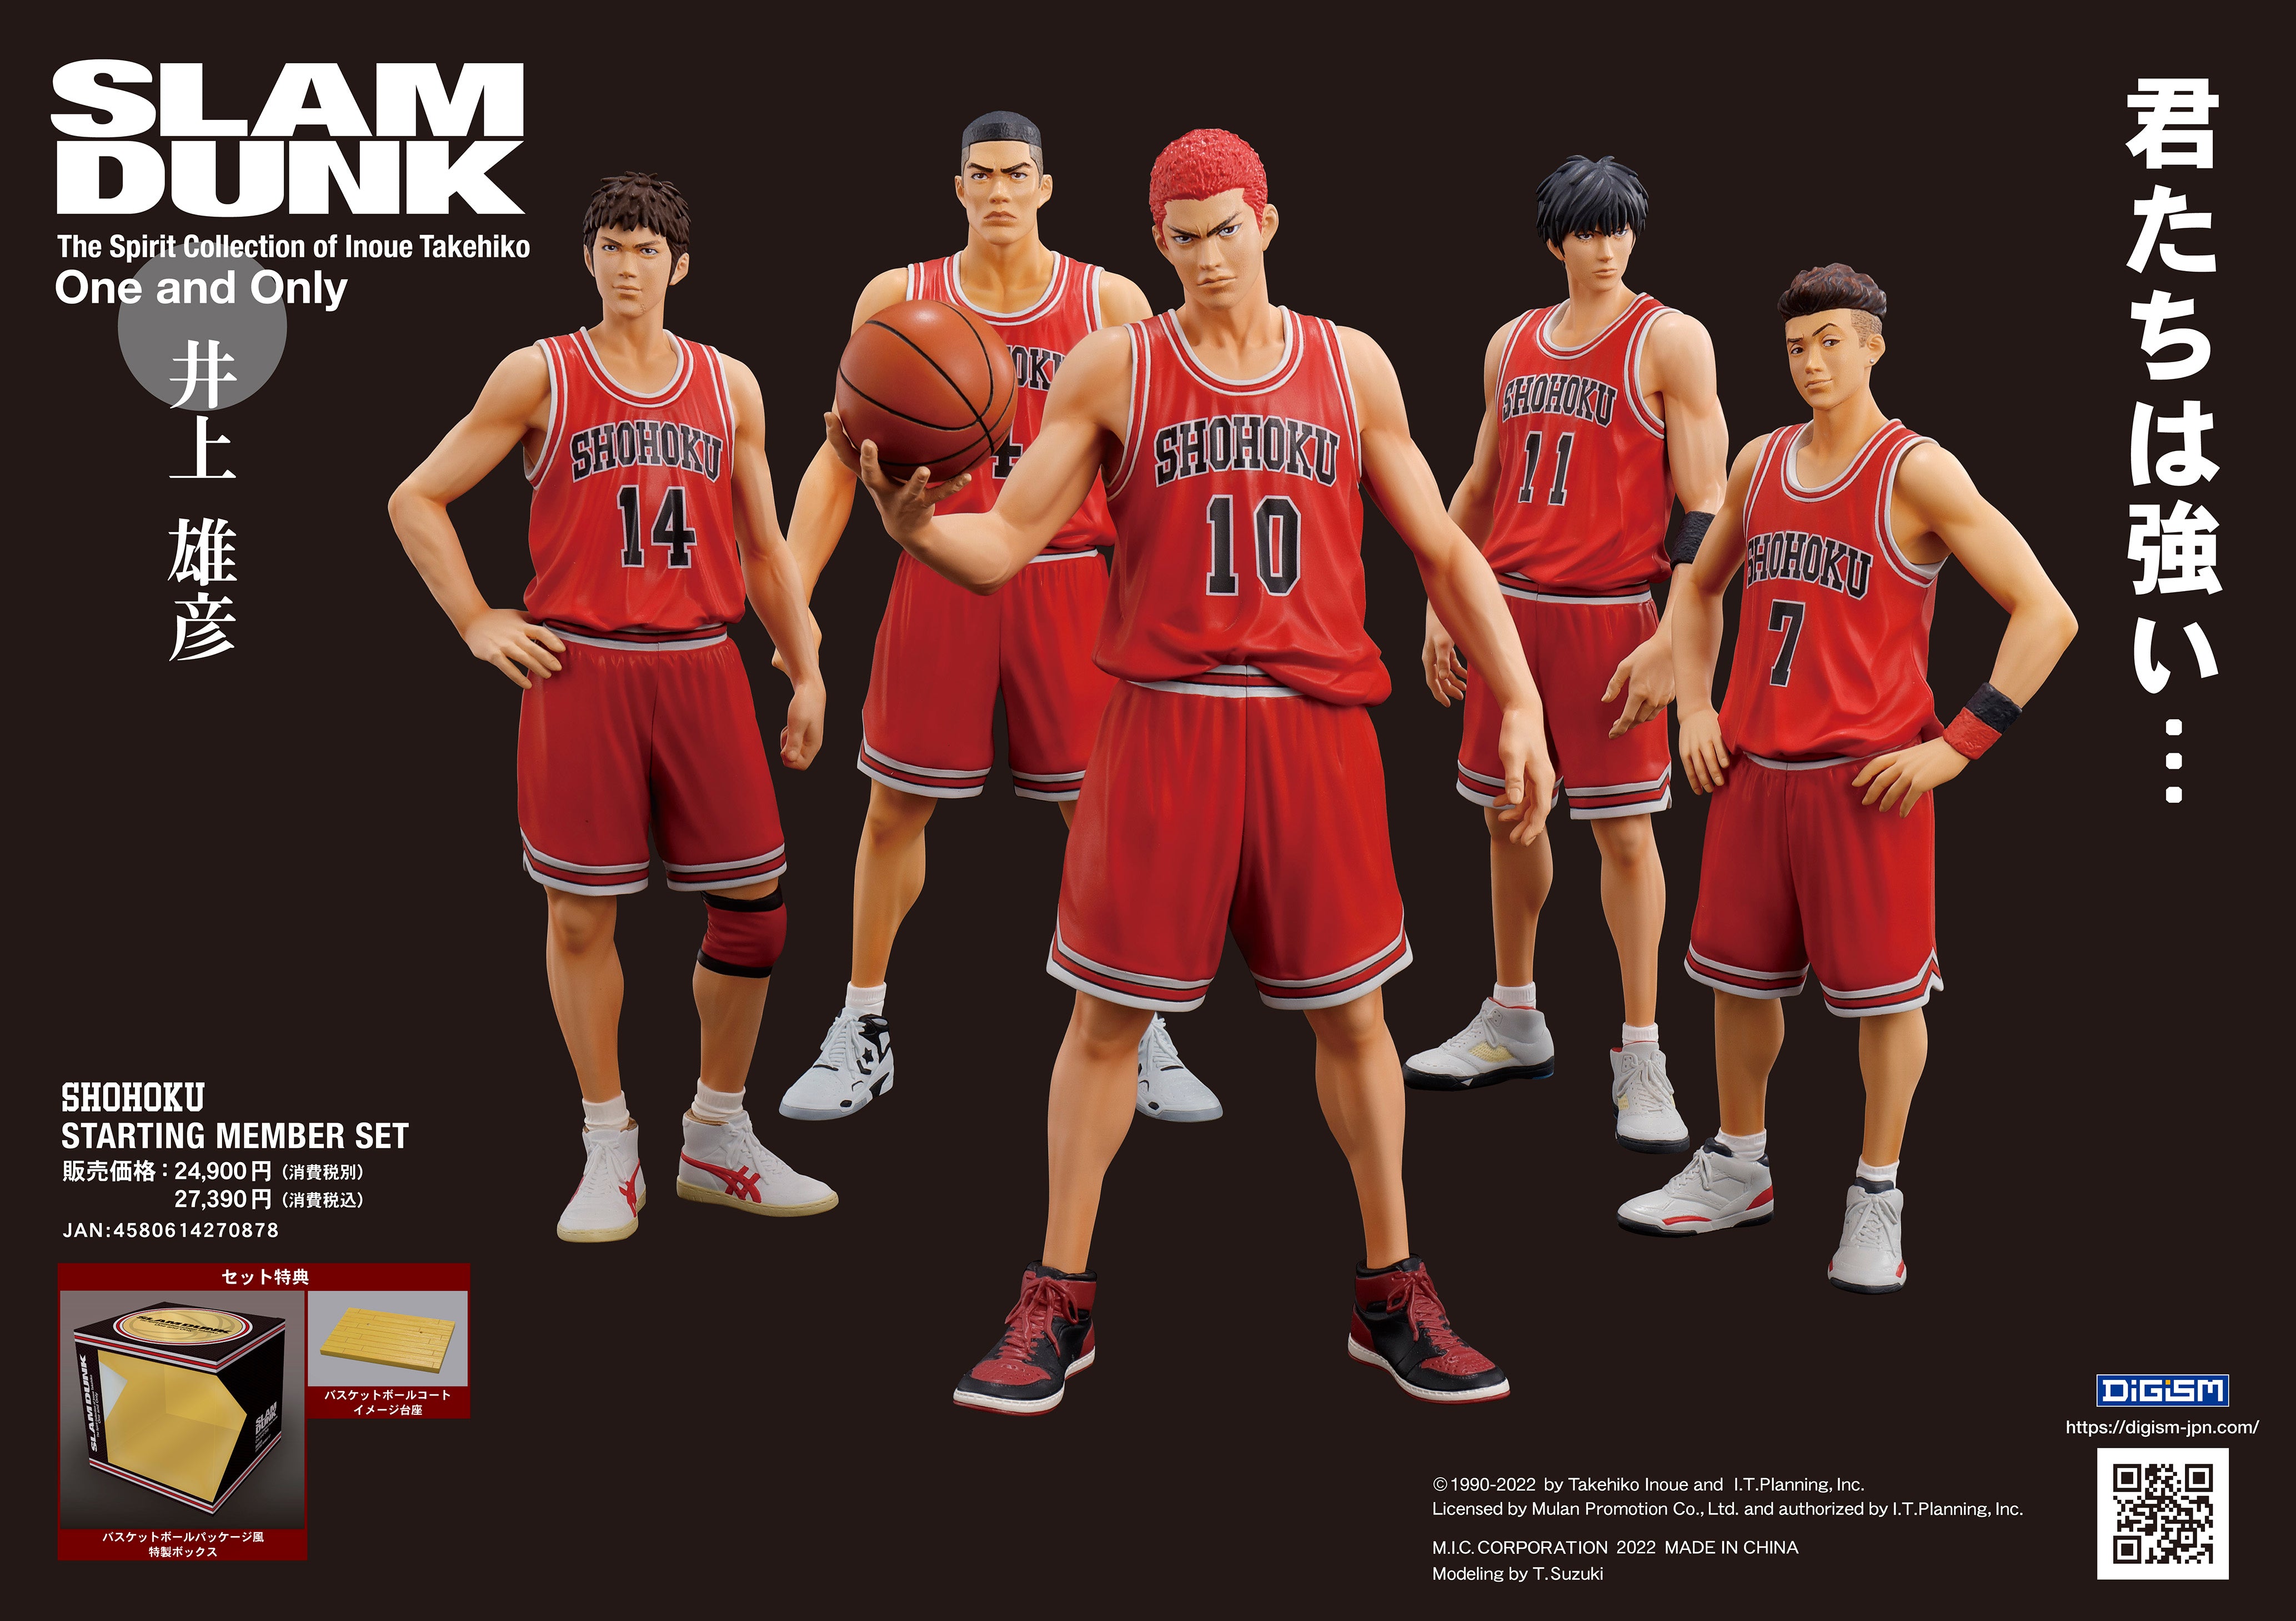 The spirit collection of Inoue Takehiko [ SLAM DUNK ] One and Only 湘北  STARTING MEMBER SET 5 figures (Black box ver.) 人物模型 (手办 / 公仔) ※附 官方传单